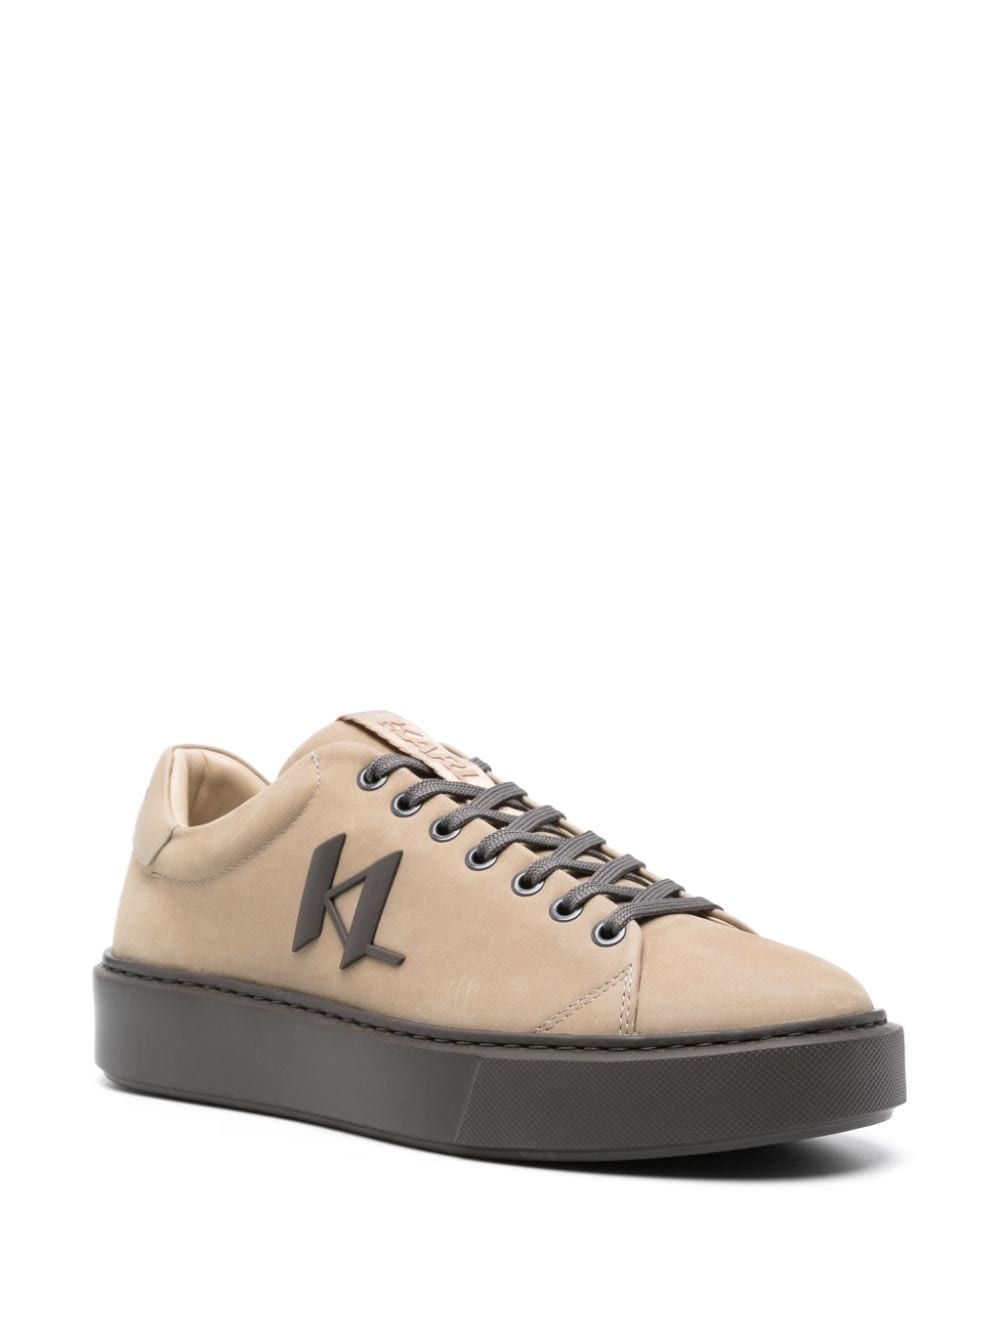 Louis Vuitton Suede And Monogram Canvas Run Away Low Top Sneakers